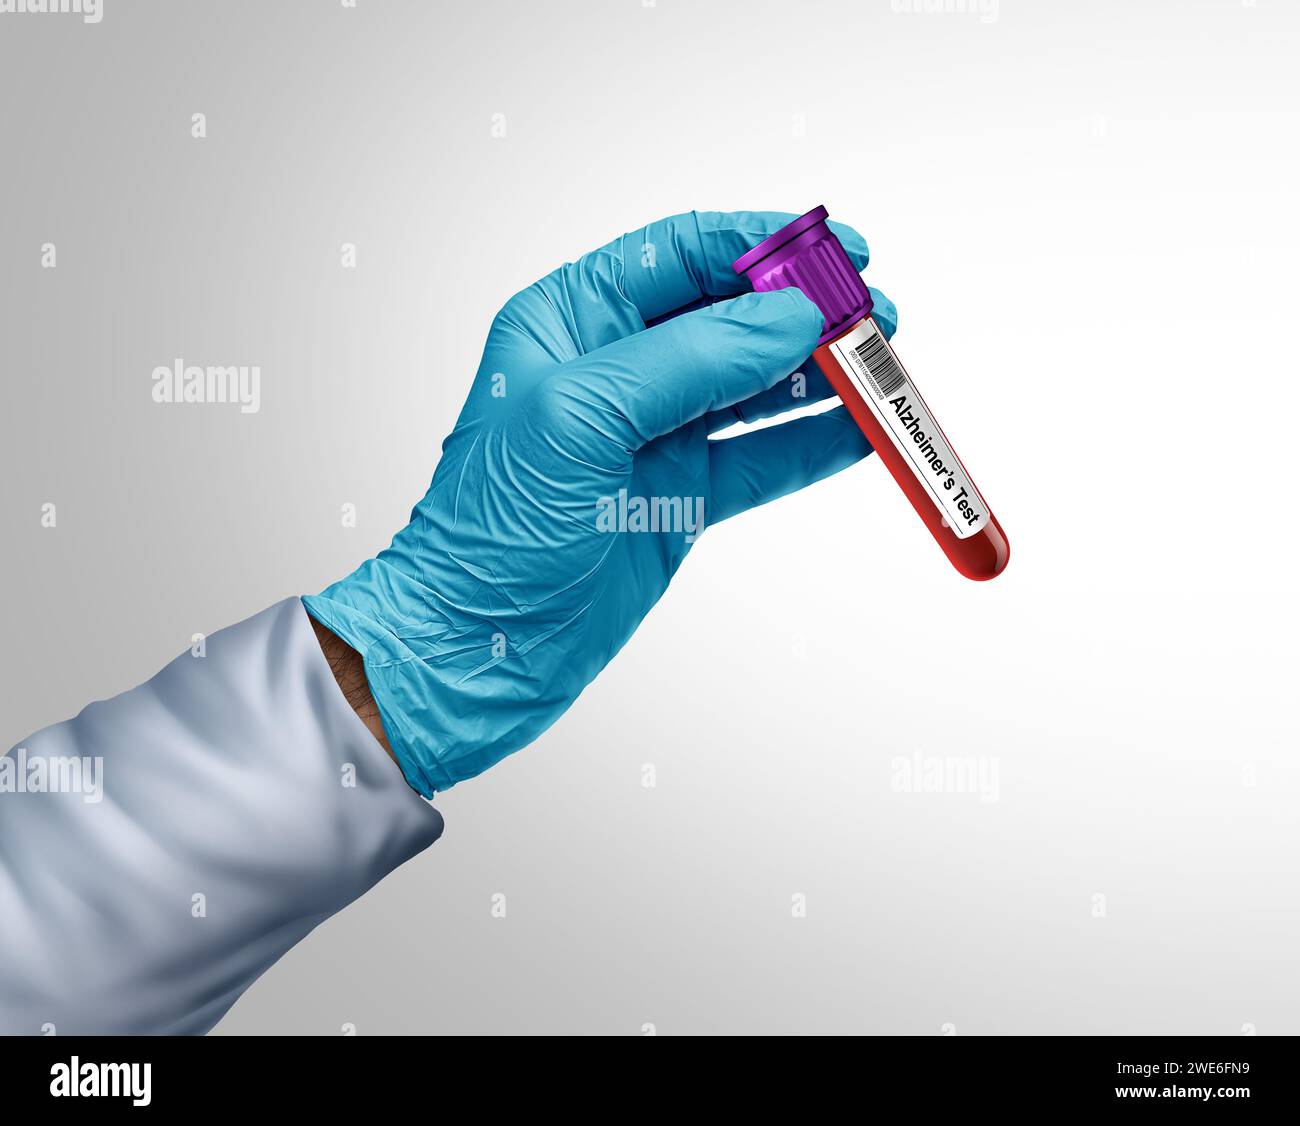 Alzheimers Blood Test Diagnostics and Alzheimer Dementia screening for early detection of brain cognitive health disorders due to amyloid testing Stock Photo